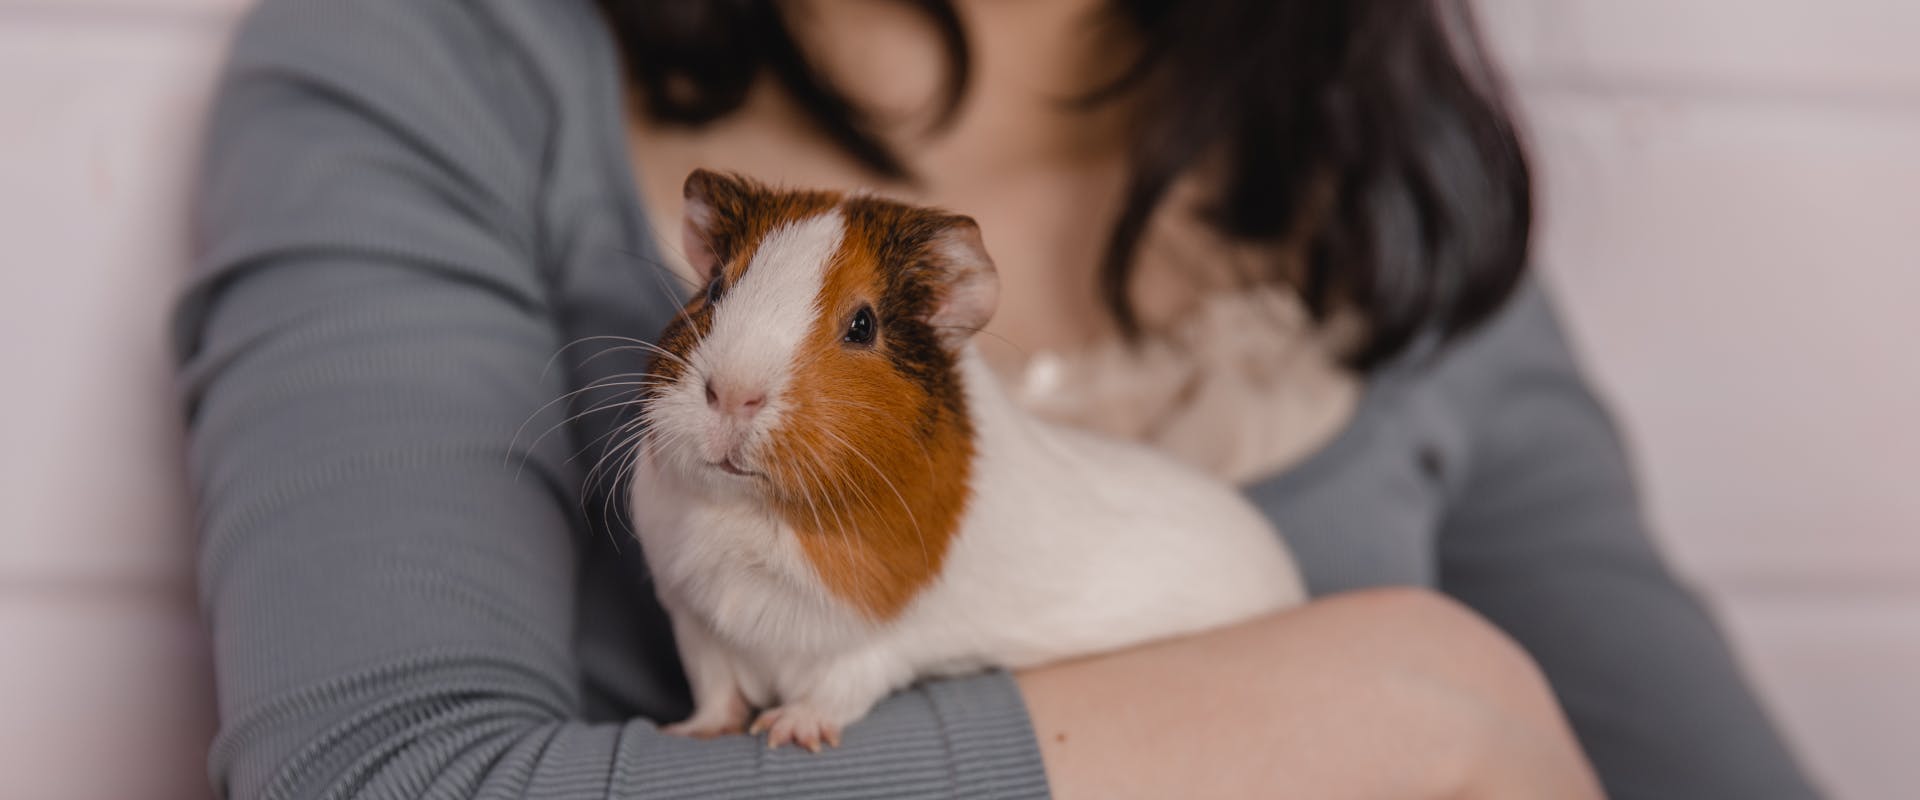 a tri-colored guinea pig resting on a woman's arm looking directly at the camera